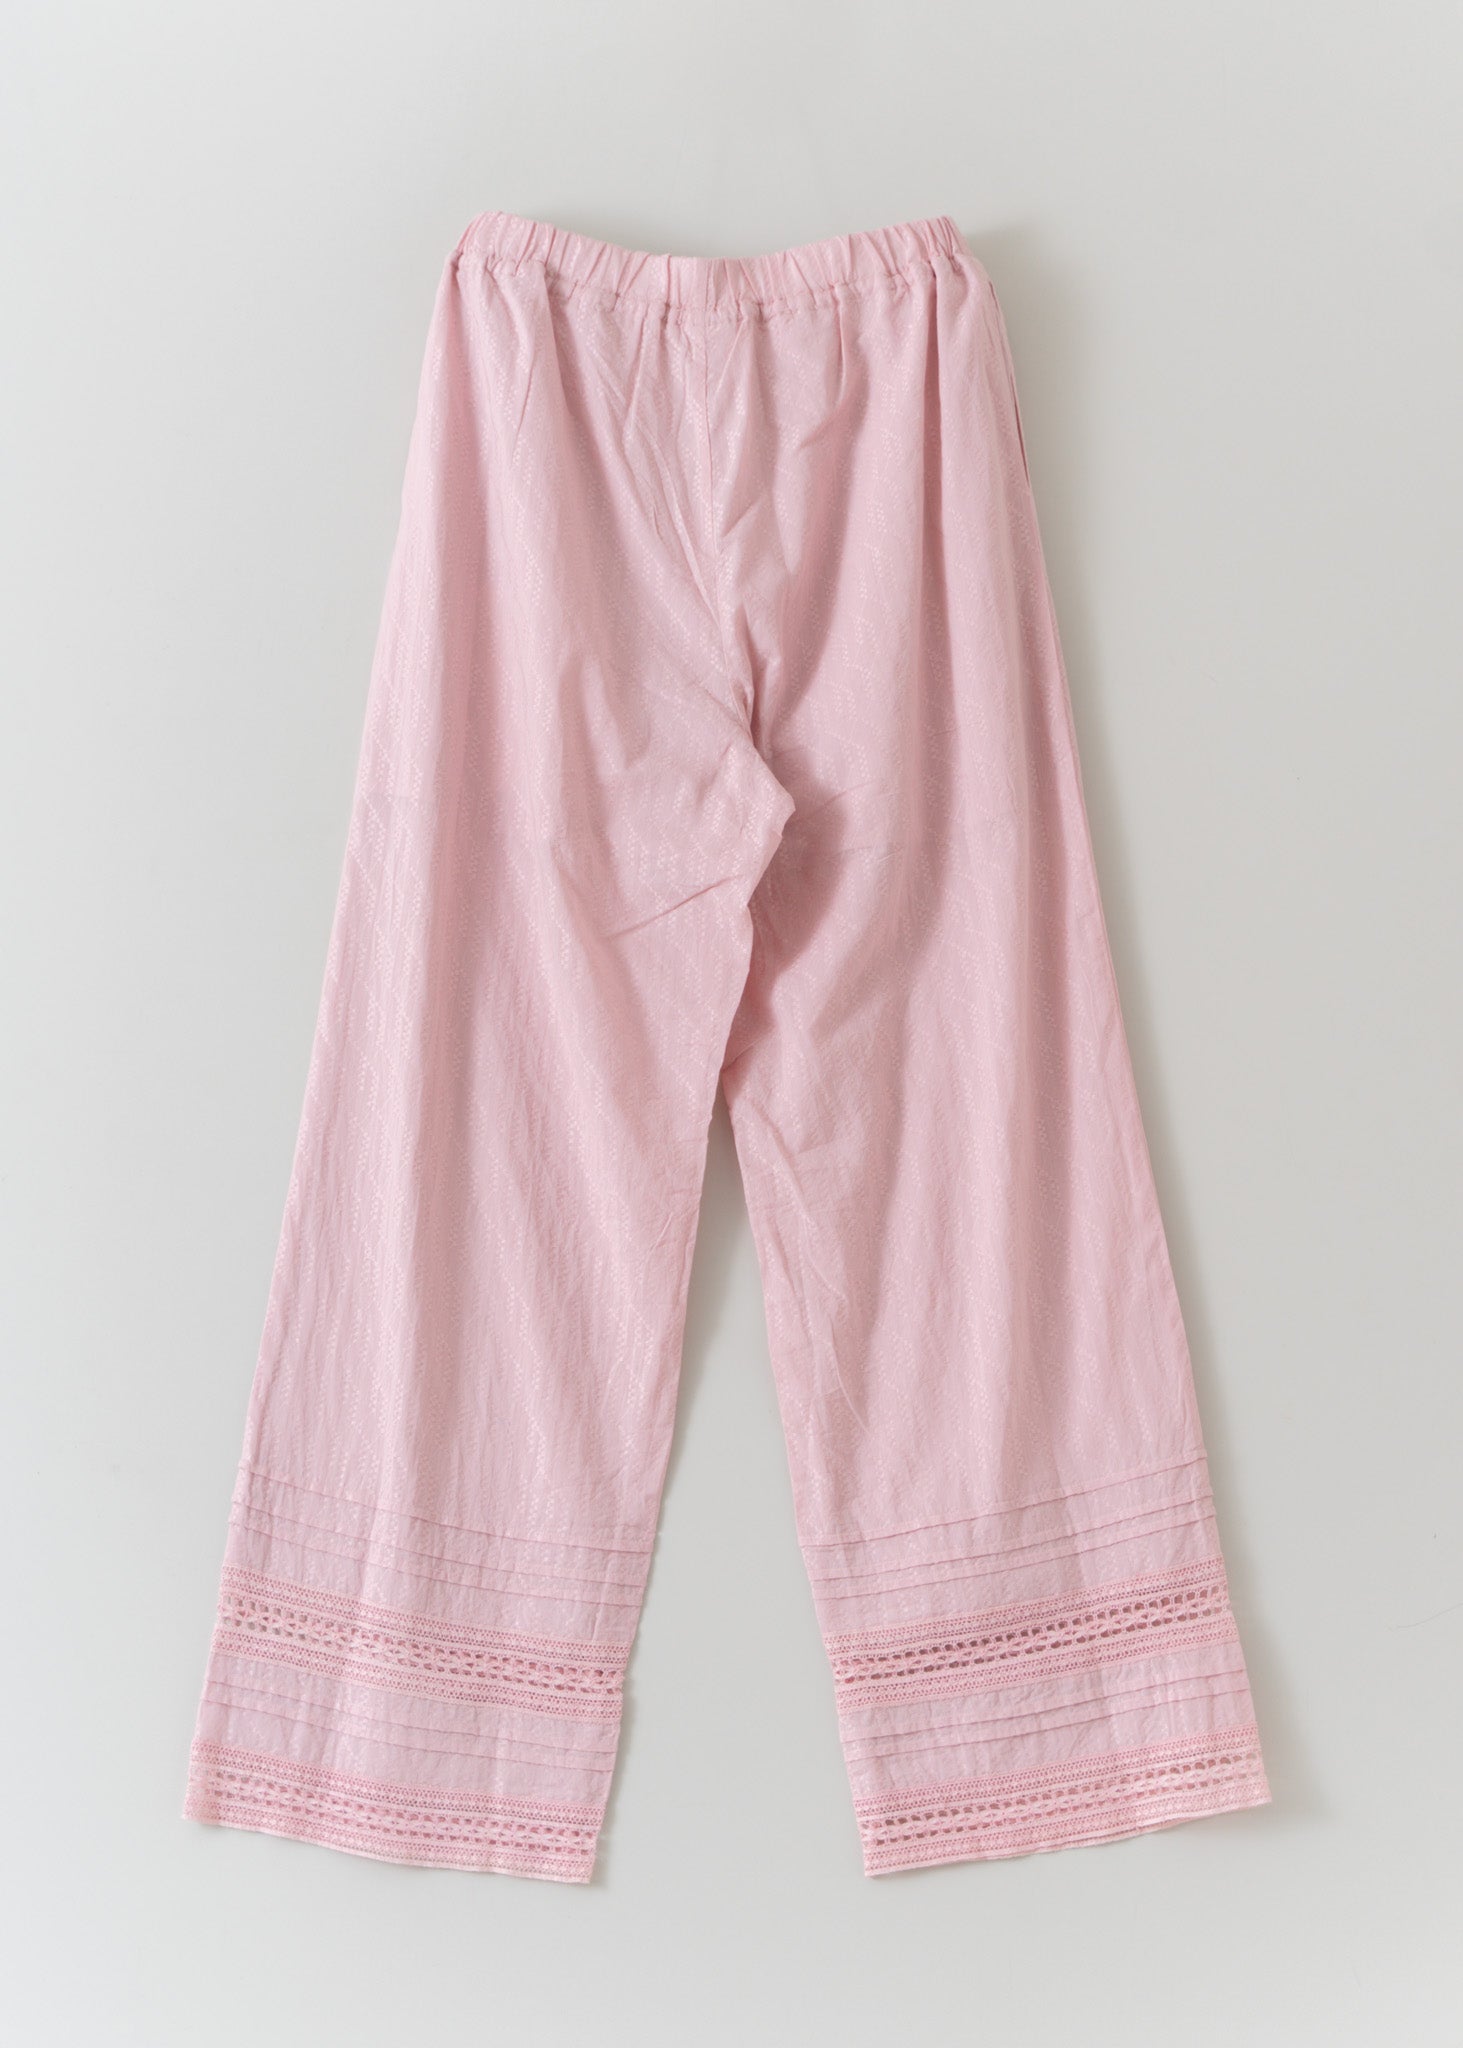 Cotton Dobby Lace & Pintuck Pants